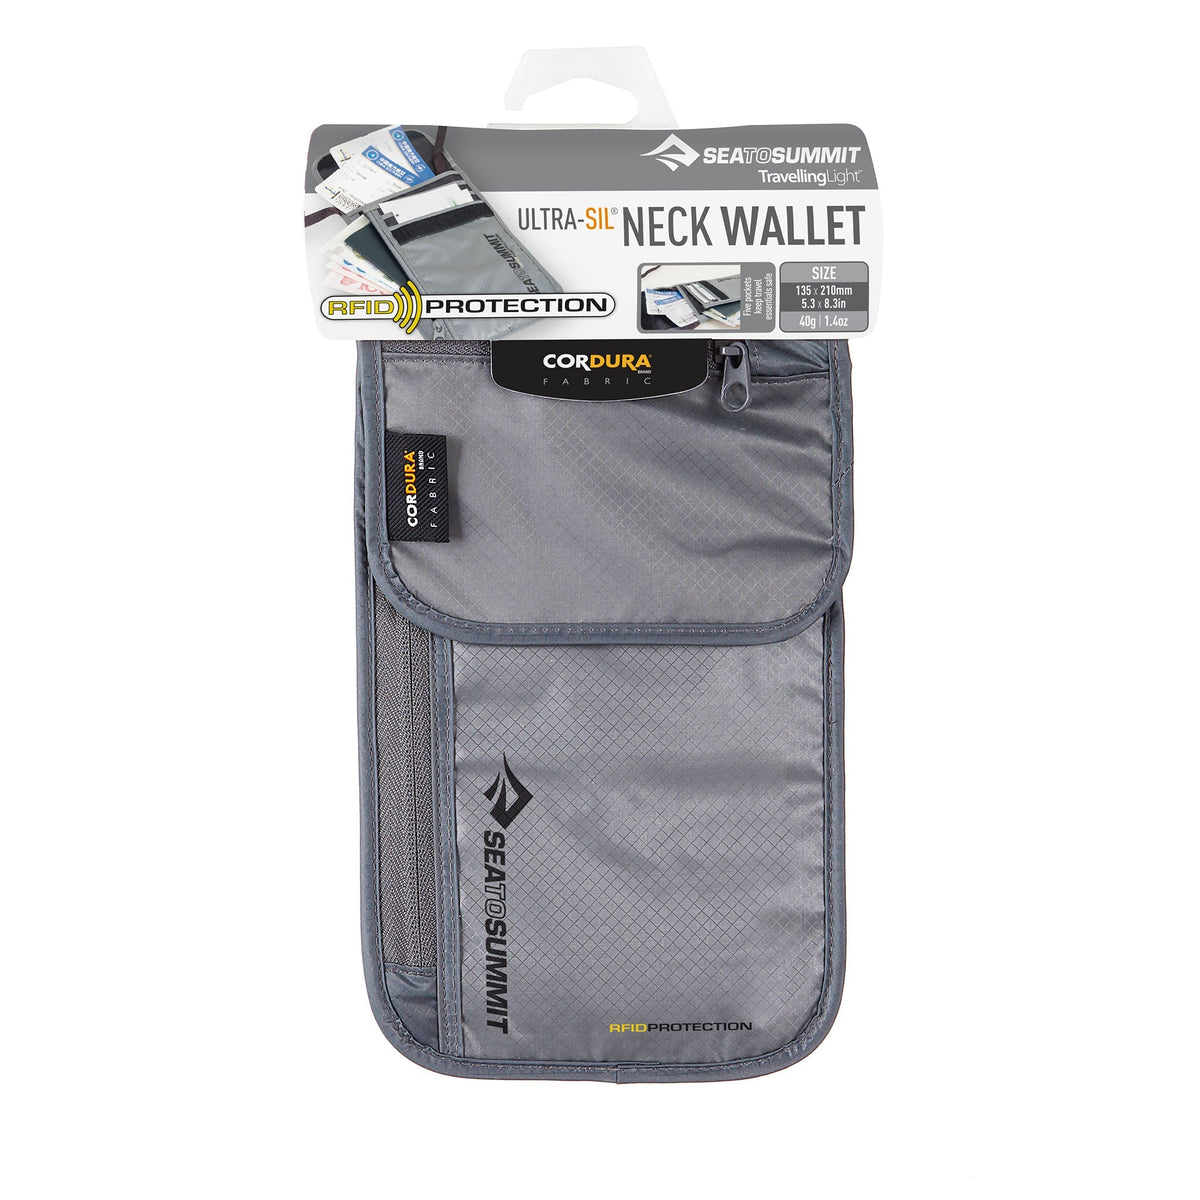 RFID Travel Neck Wallet _ protection